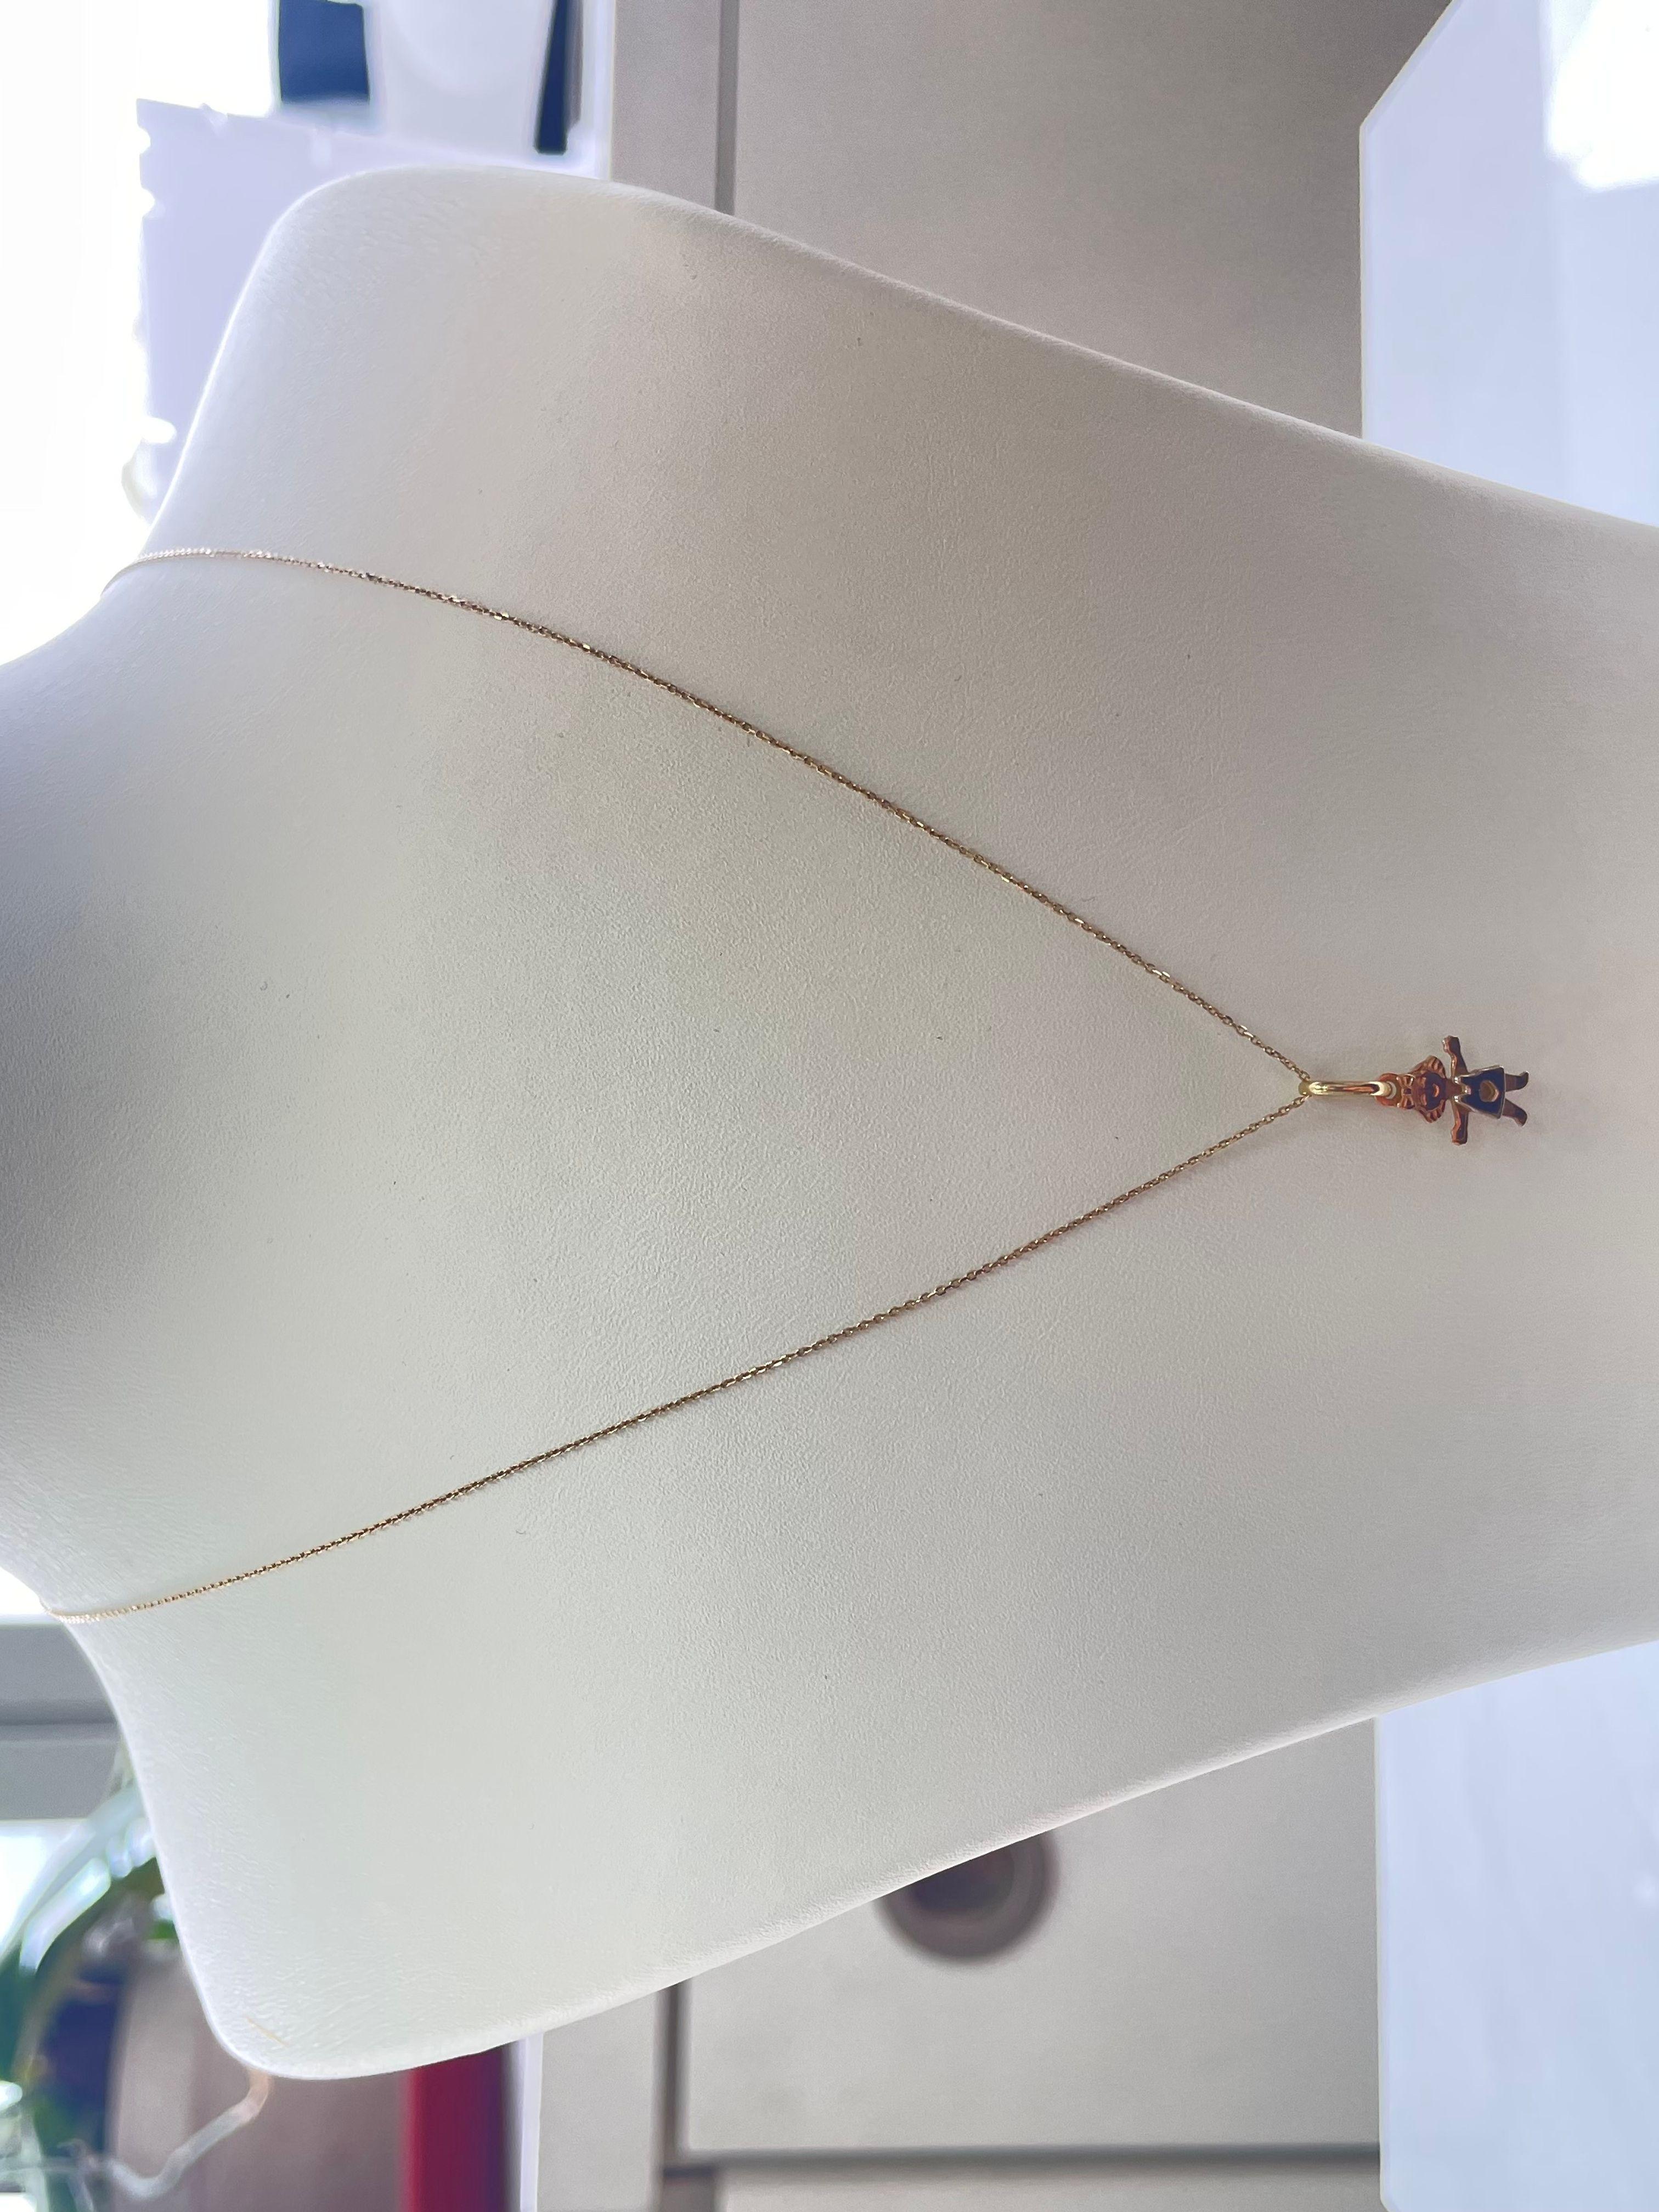 Jewelry Yellow Gold 14k  (the gold has been tested by a professional)
Total Metal Weight: 1.05 g
Size: Pendant: 11.82 x 8.08 mm 
         Necklace: 45 cm             

Feel free to contact us for inquiries and consultation and special requests.
The